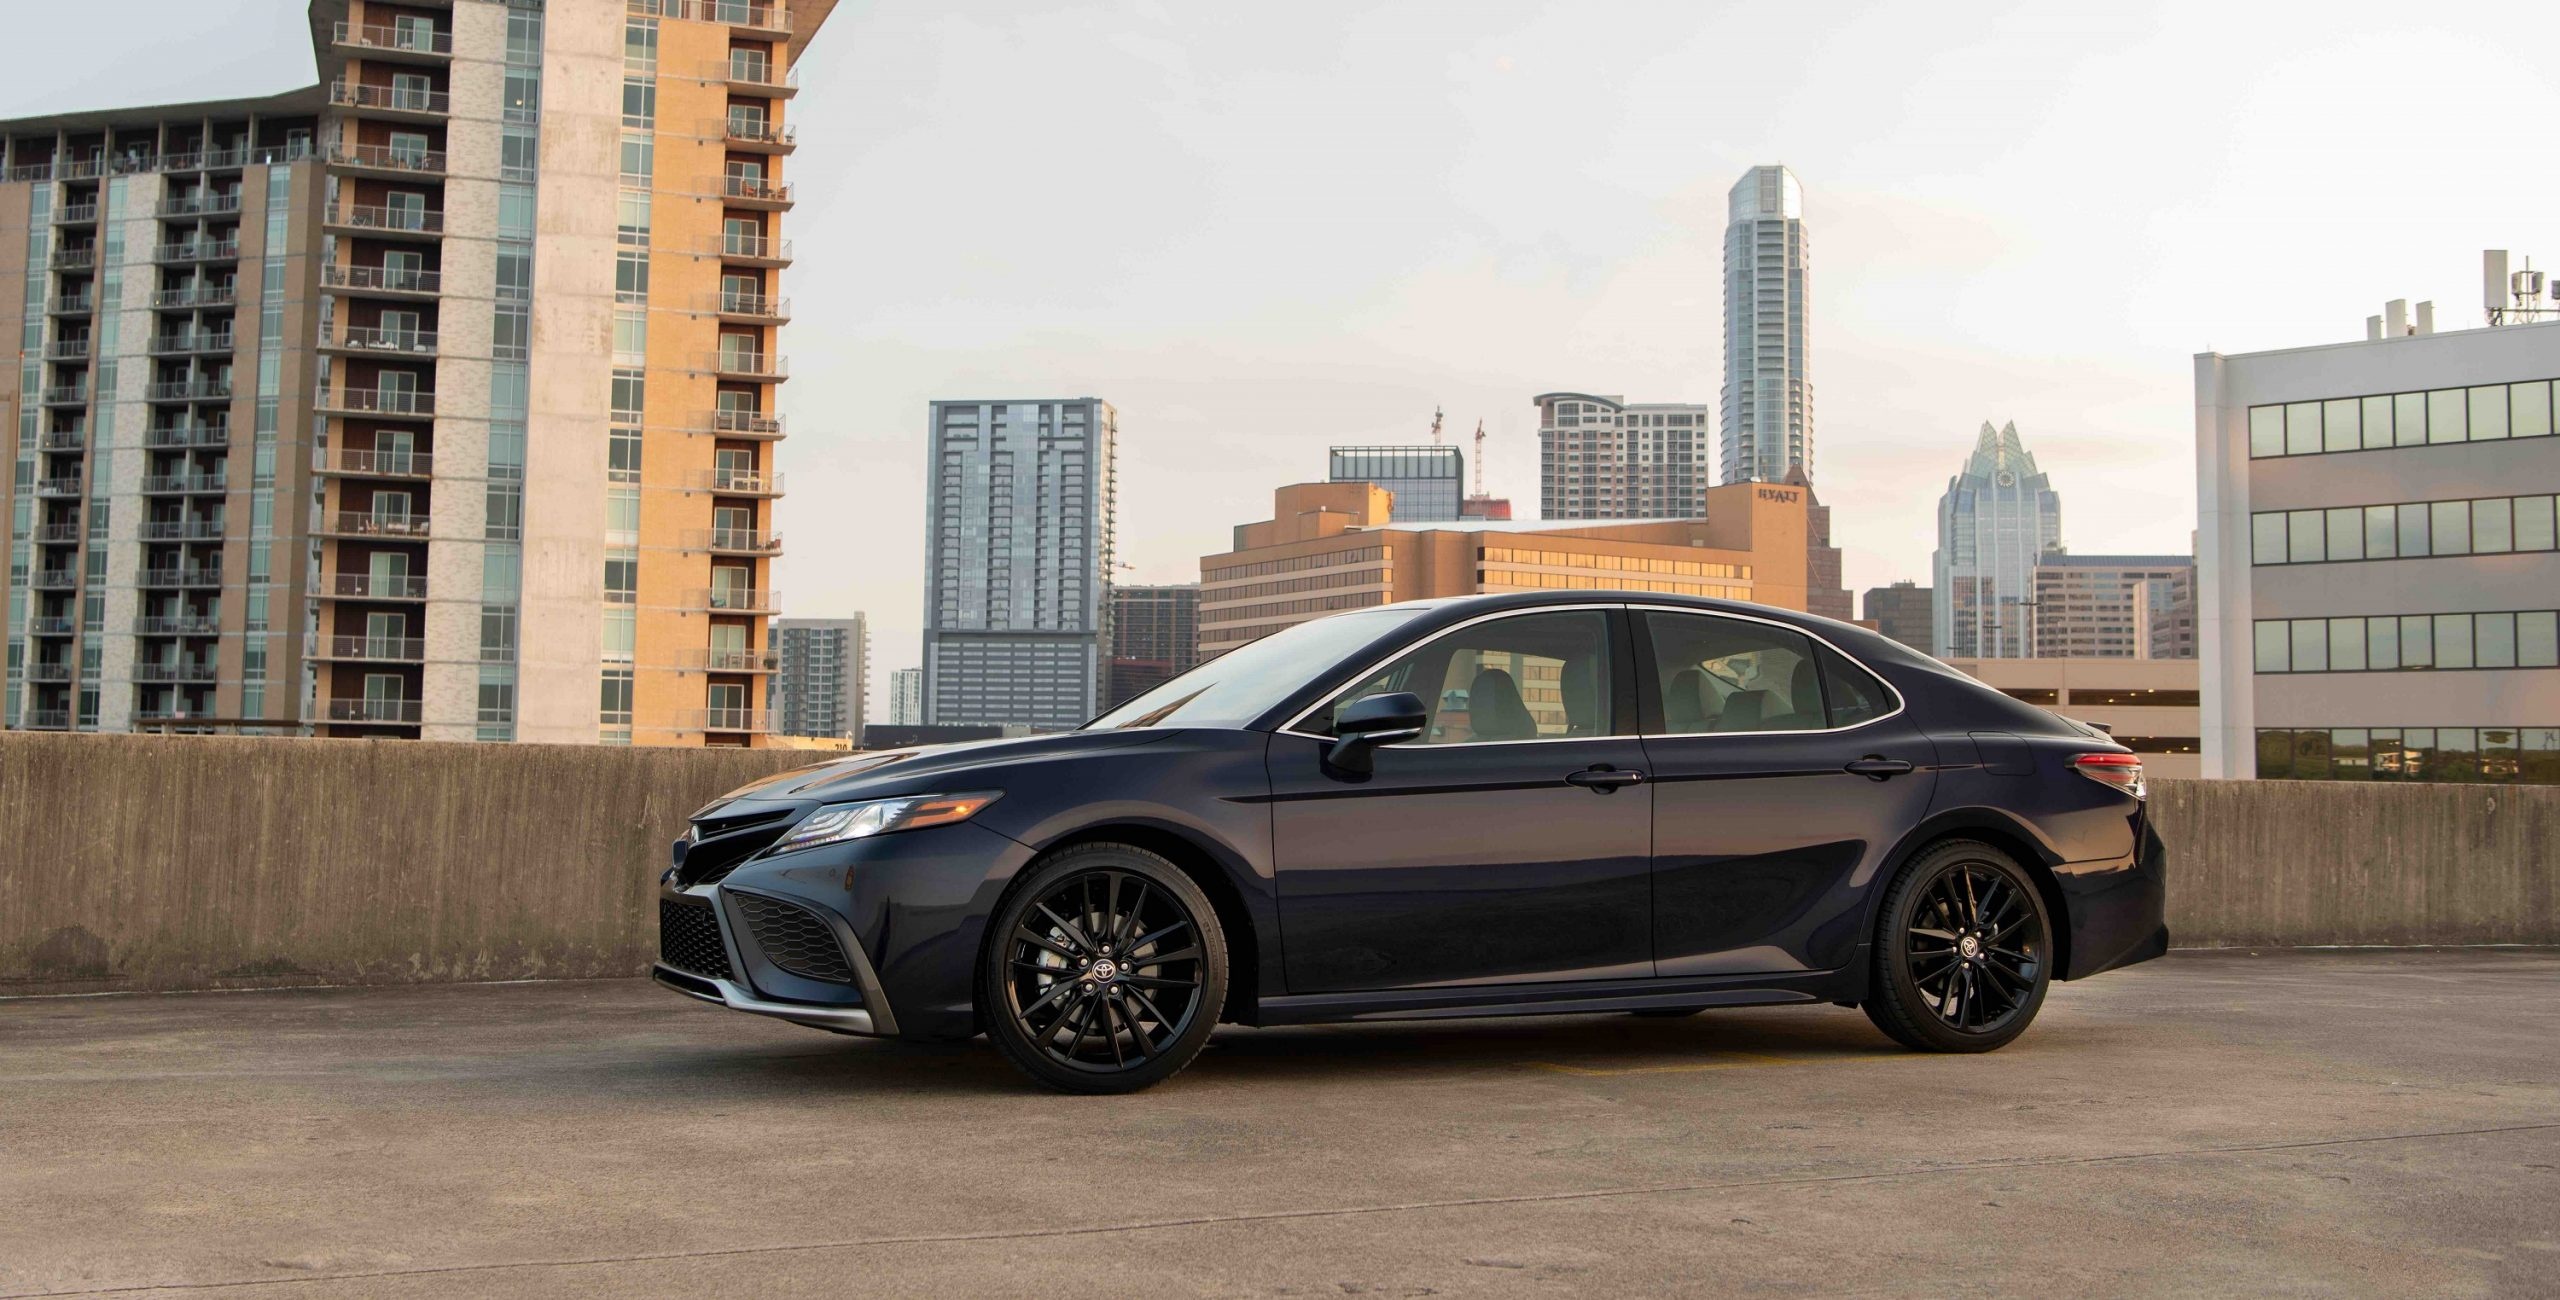 Toyota Camry, Before buying guide, 2560x1300 HD Desktop